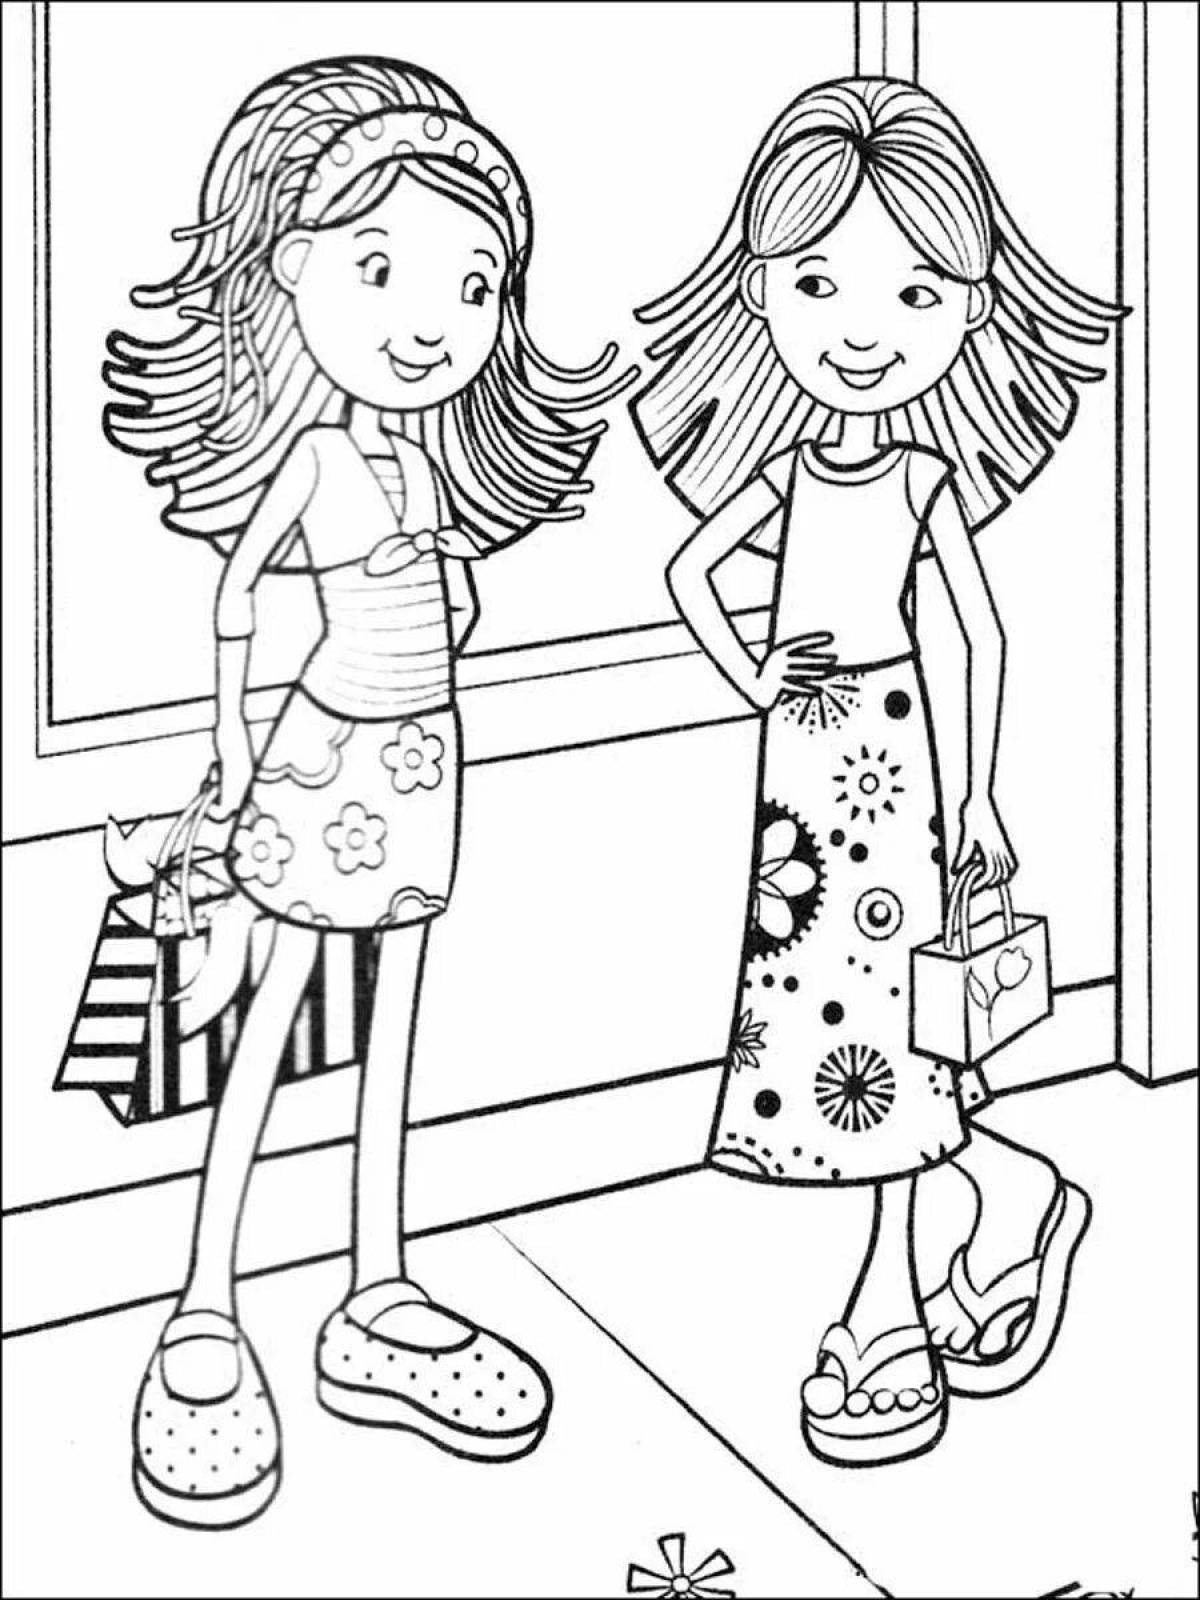 Fun coloring pages for girls and friends